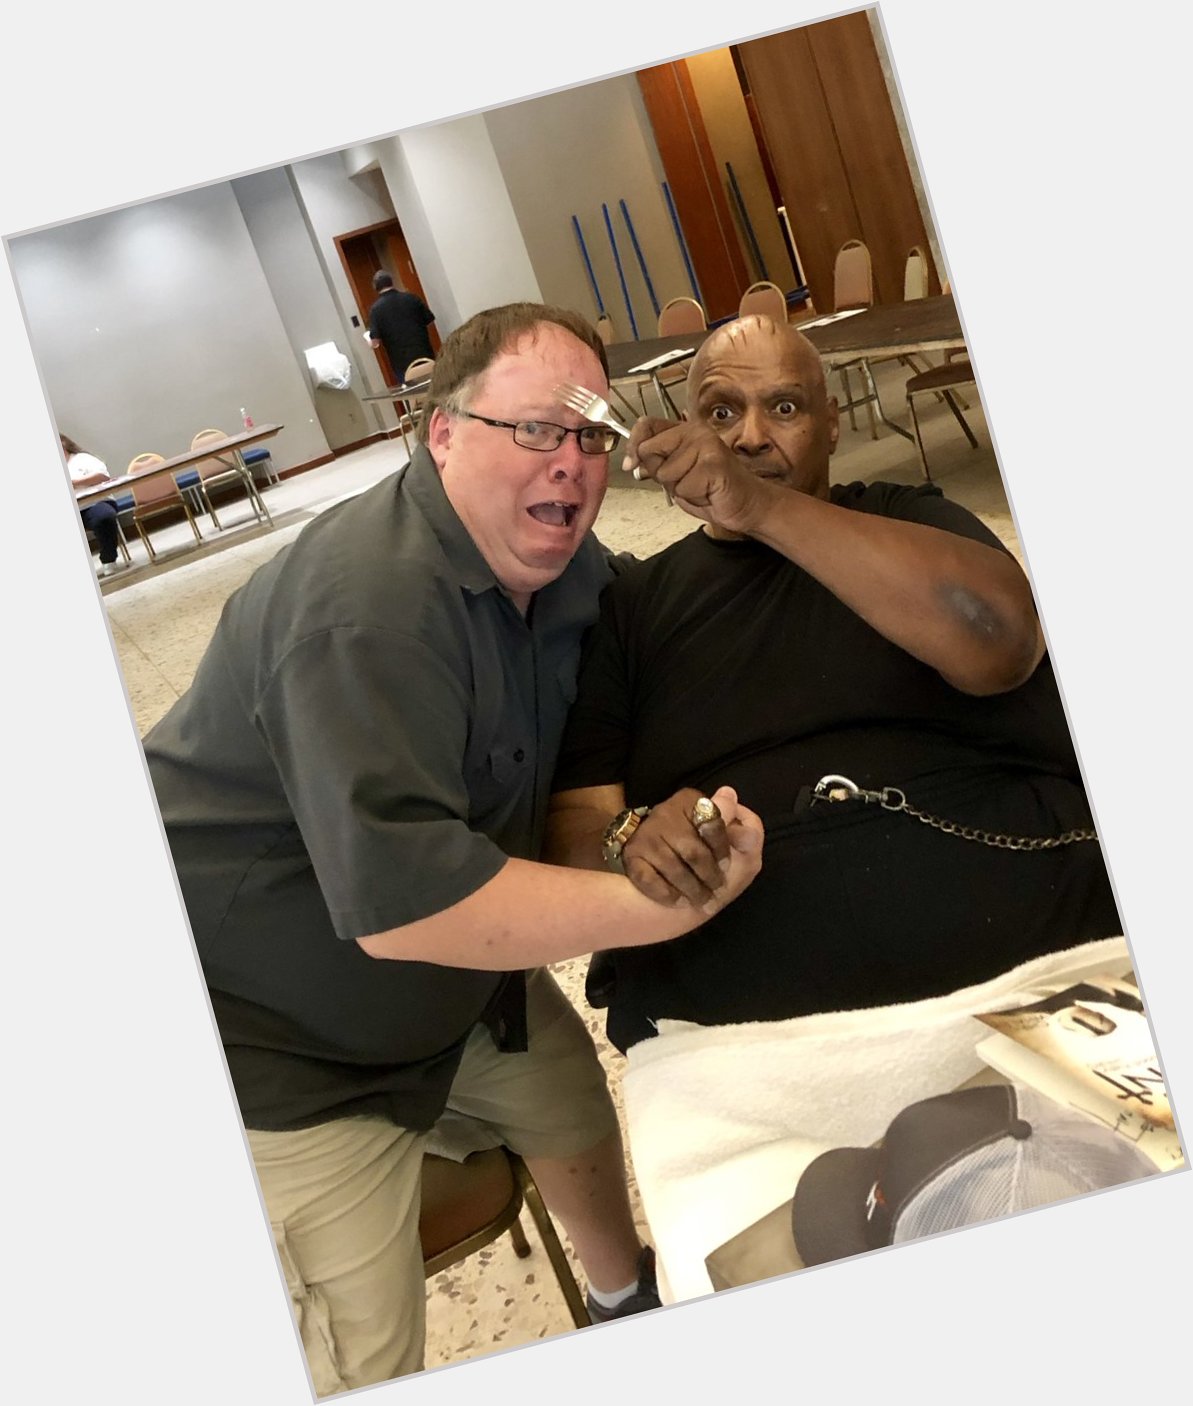 Happy 80th birthday to the Madman from the Sudan, the legendary Abdullah the Butcher! 